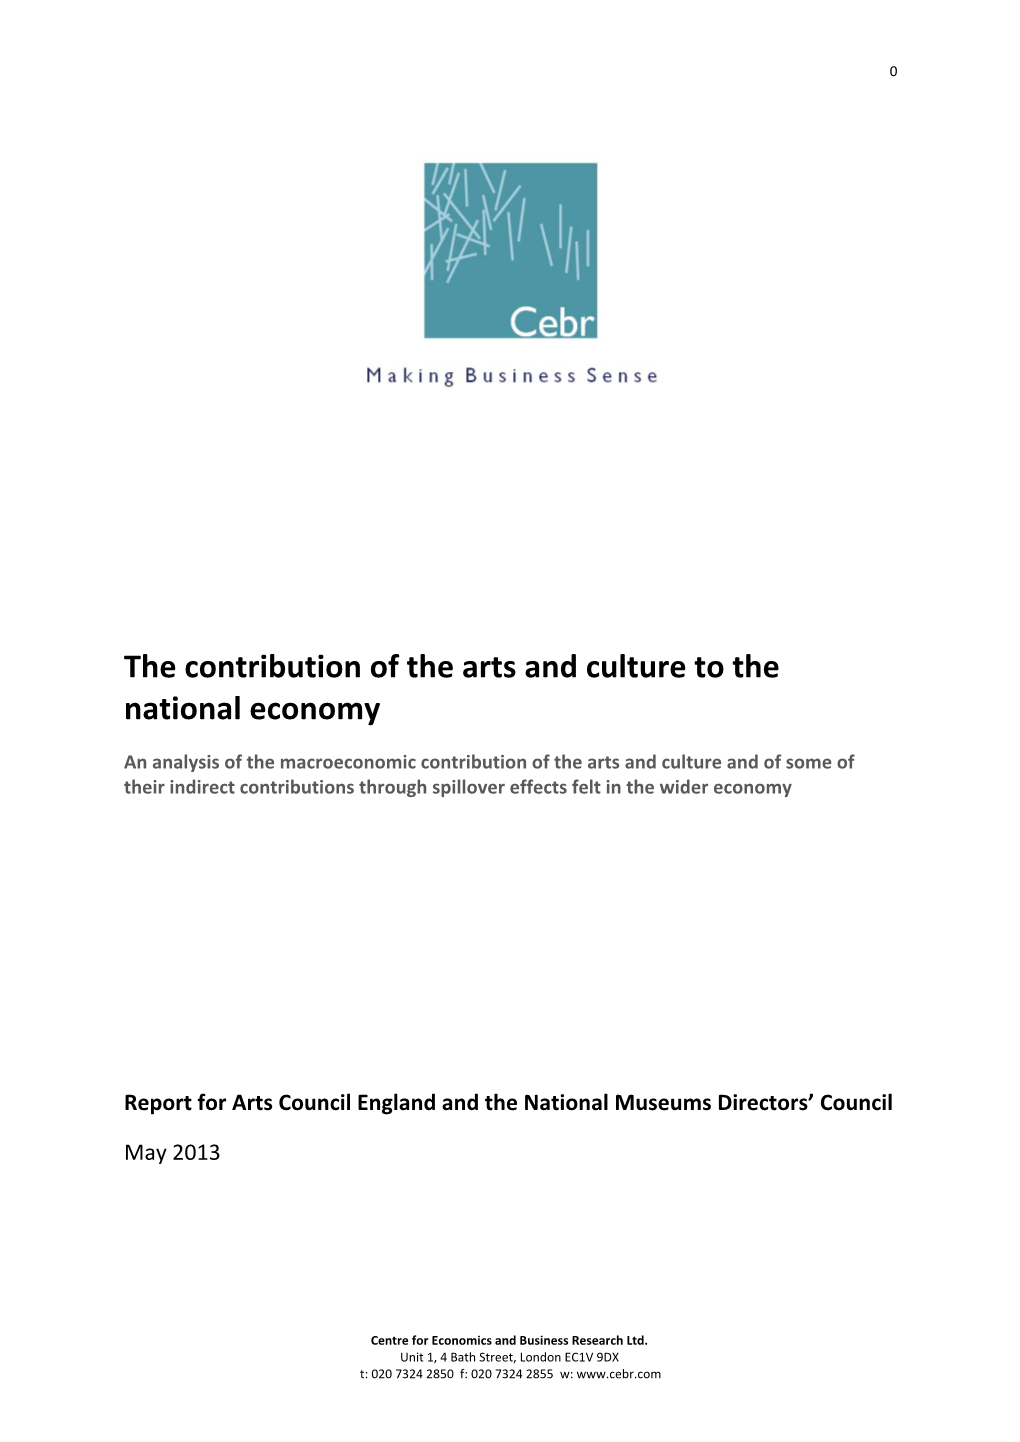 The Contribution of the Arts and Culture to the National Economy (Pdf 2.9MB)